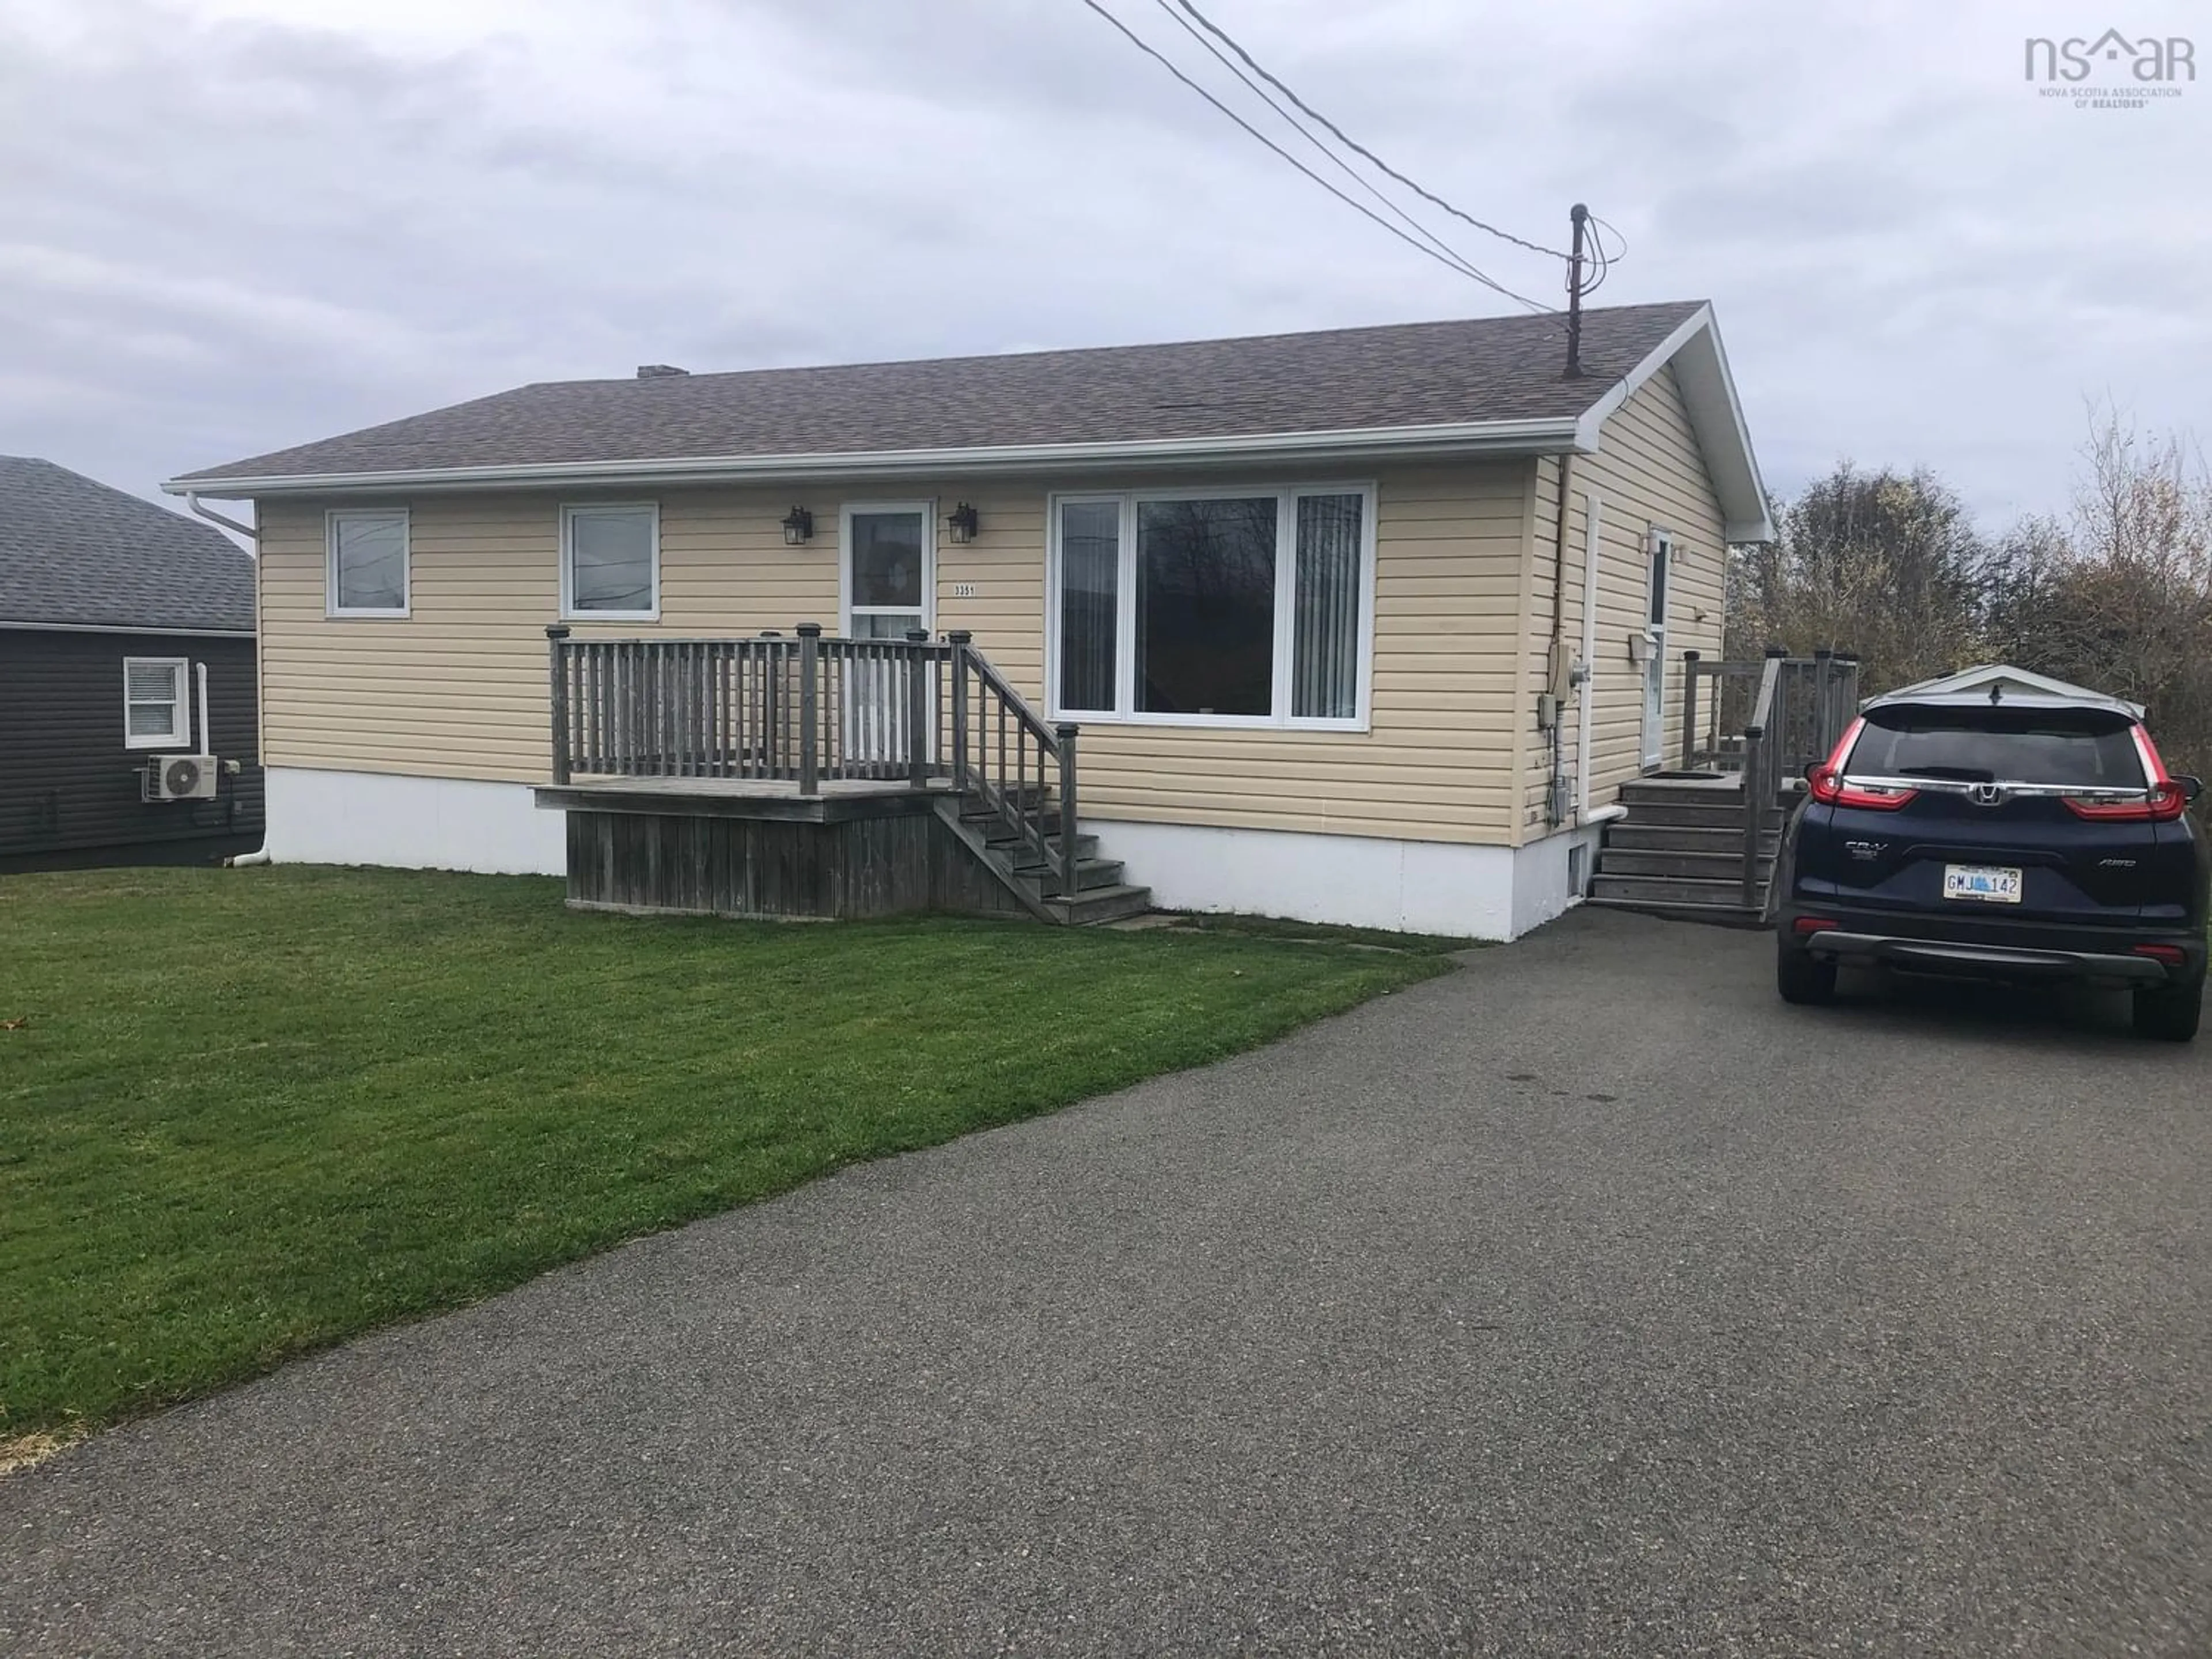 Home with unknown exterior material for 3351 Macleod Ave, New Waterford Nova Scotia B1H 4H4